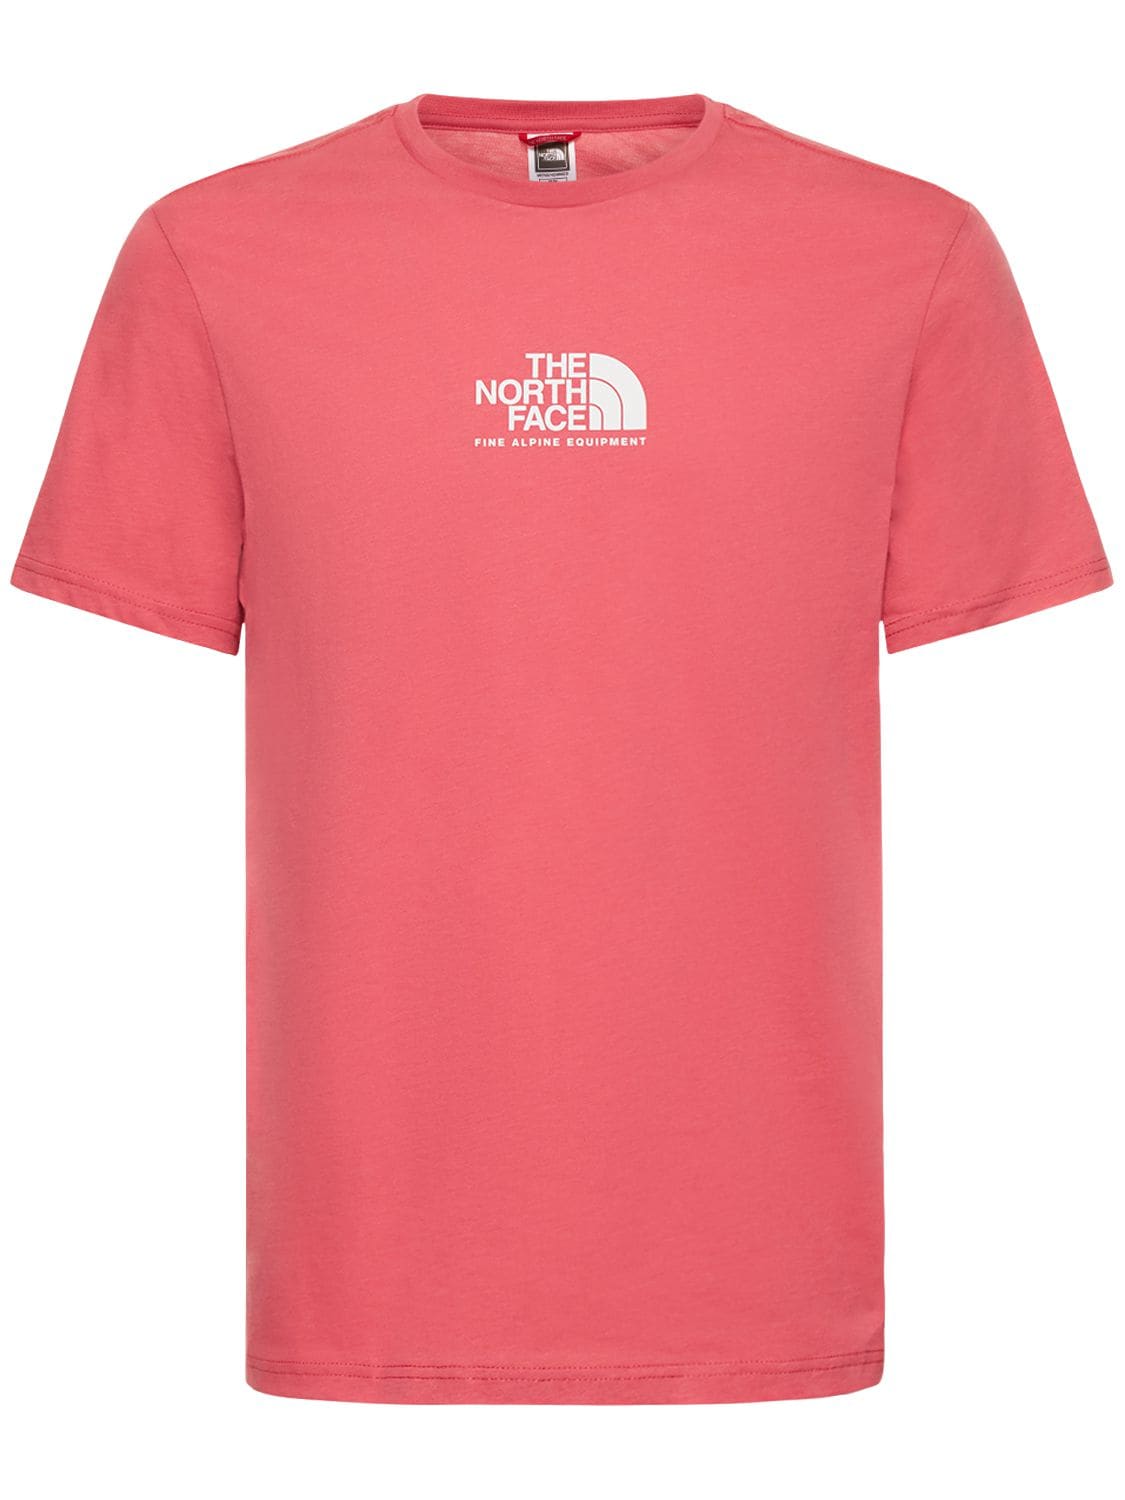 The North Face Fine Alpine Equipment 3 T-shirt In Cosmo Pink